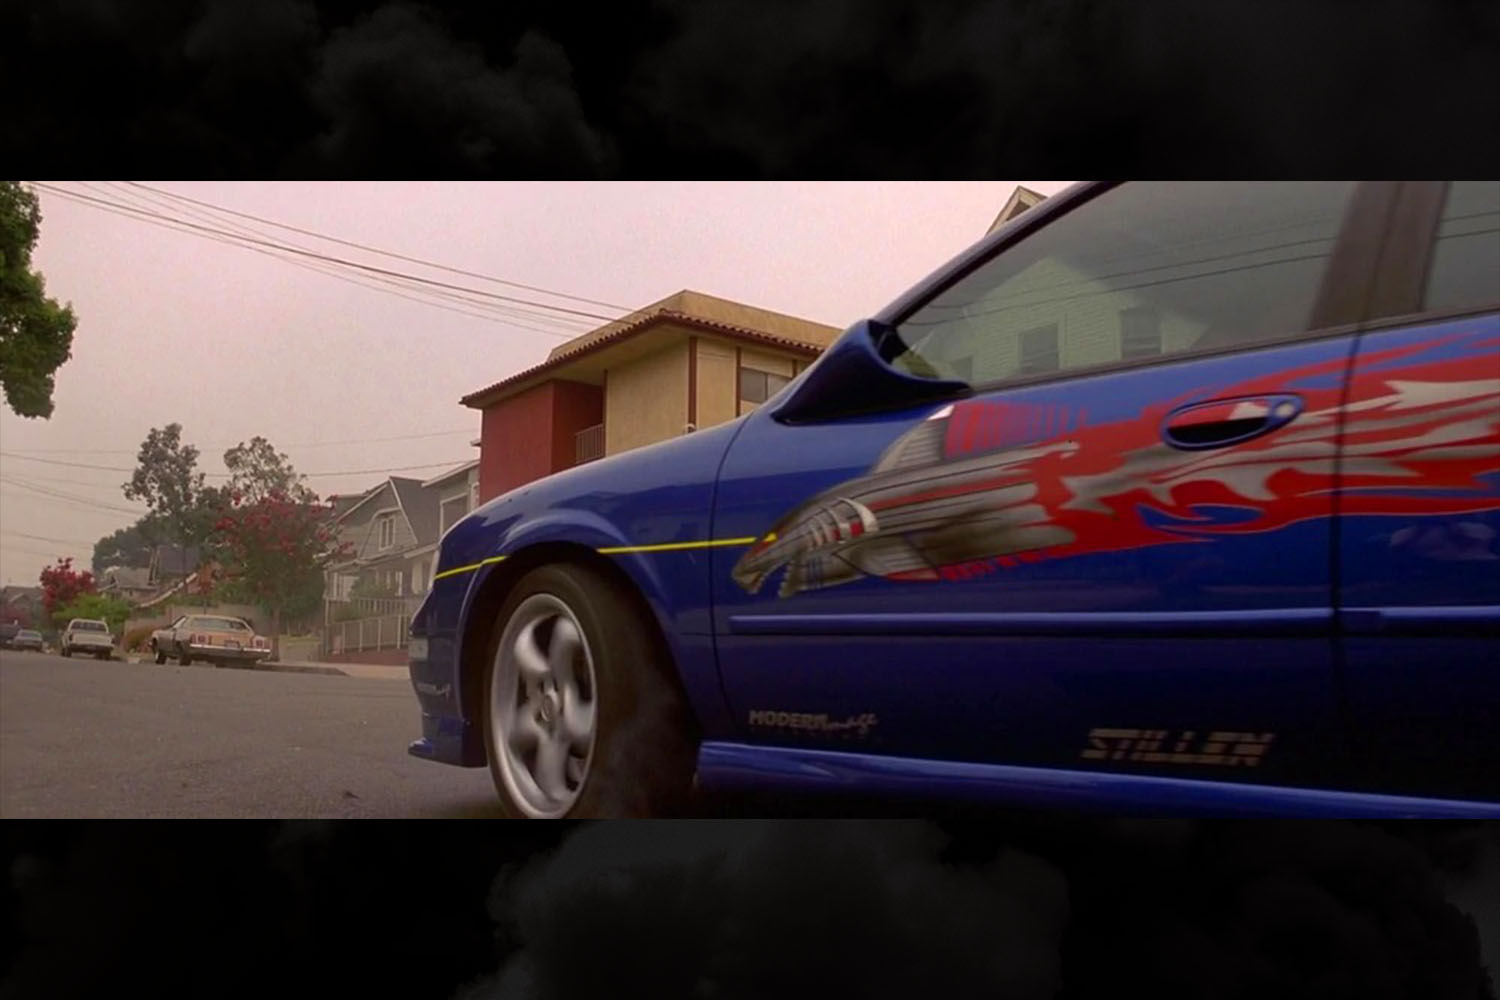 The shark torpedo graphics on the side of Vince's blue 1999 Nissan Maxima in the original The Fast and the Furious